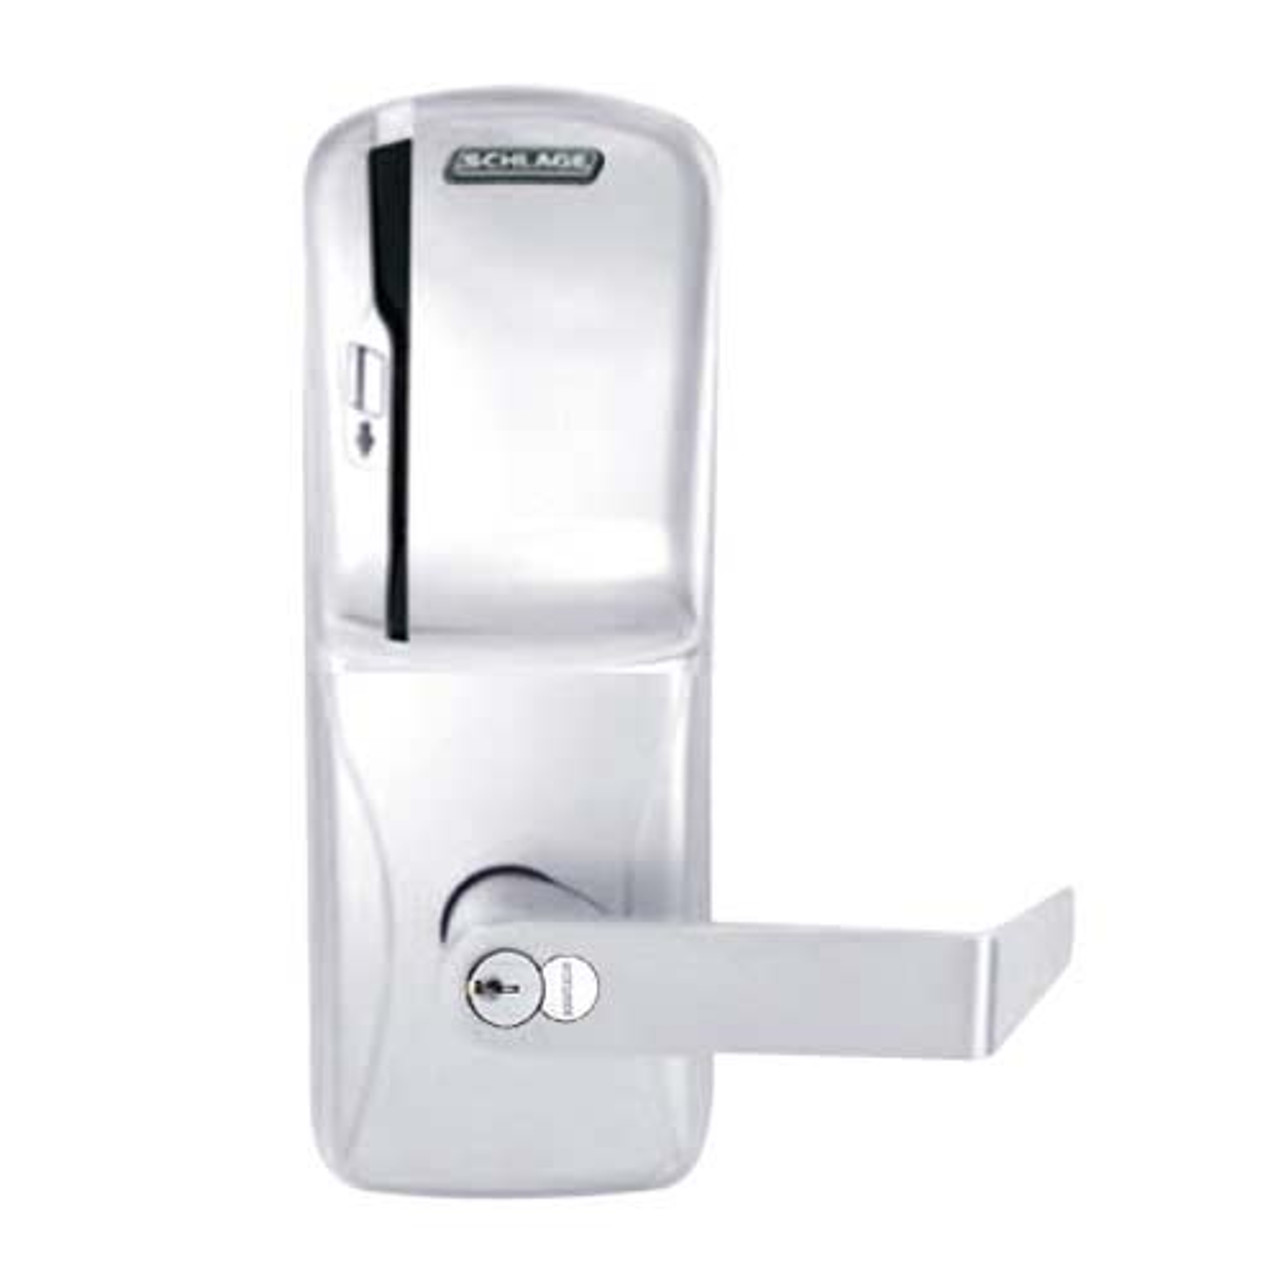 CO200-MD-40-MS-RHO-GD-29R-625 Mortise Deadbolt Standalone Electronic Magnetic Stripe Locks in Bright Chrome